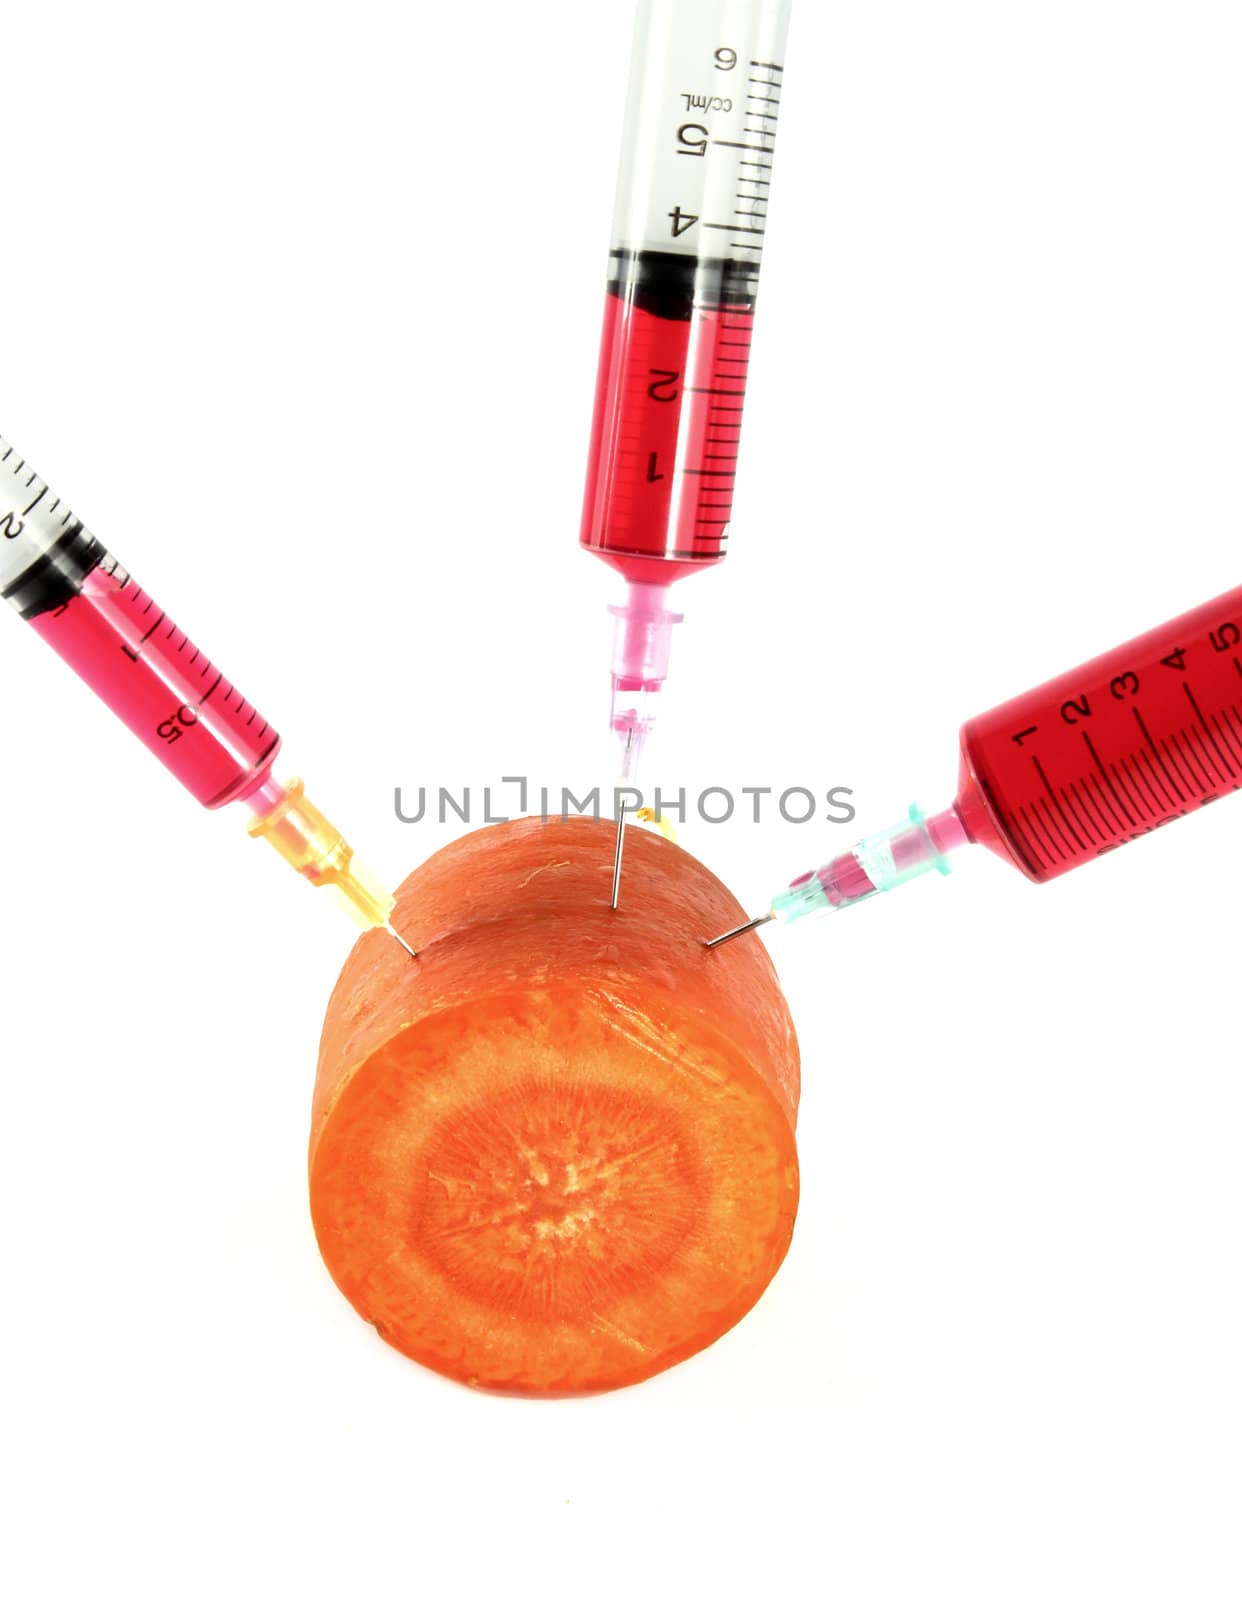 carrot with syringe injected isolated on white background by geargodz